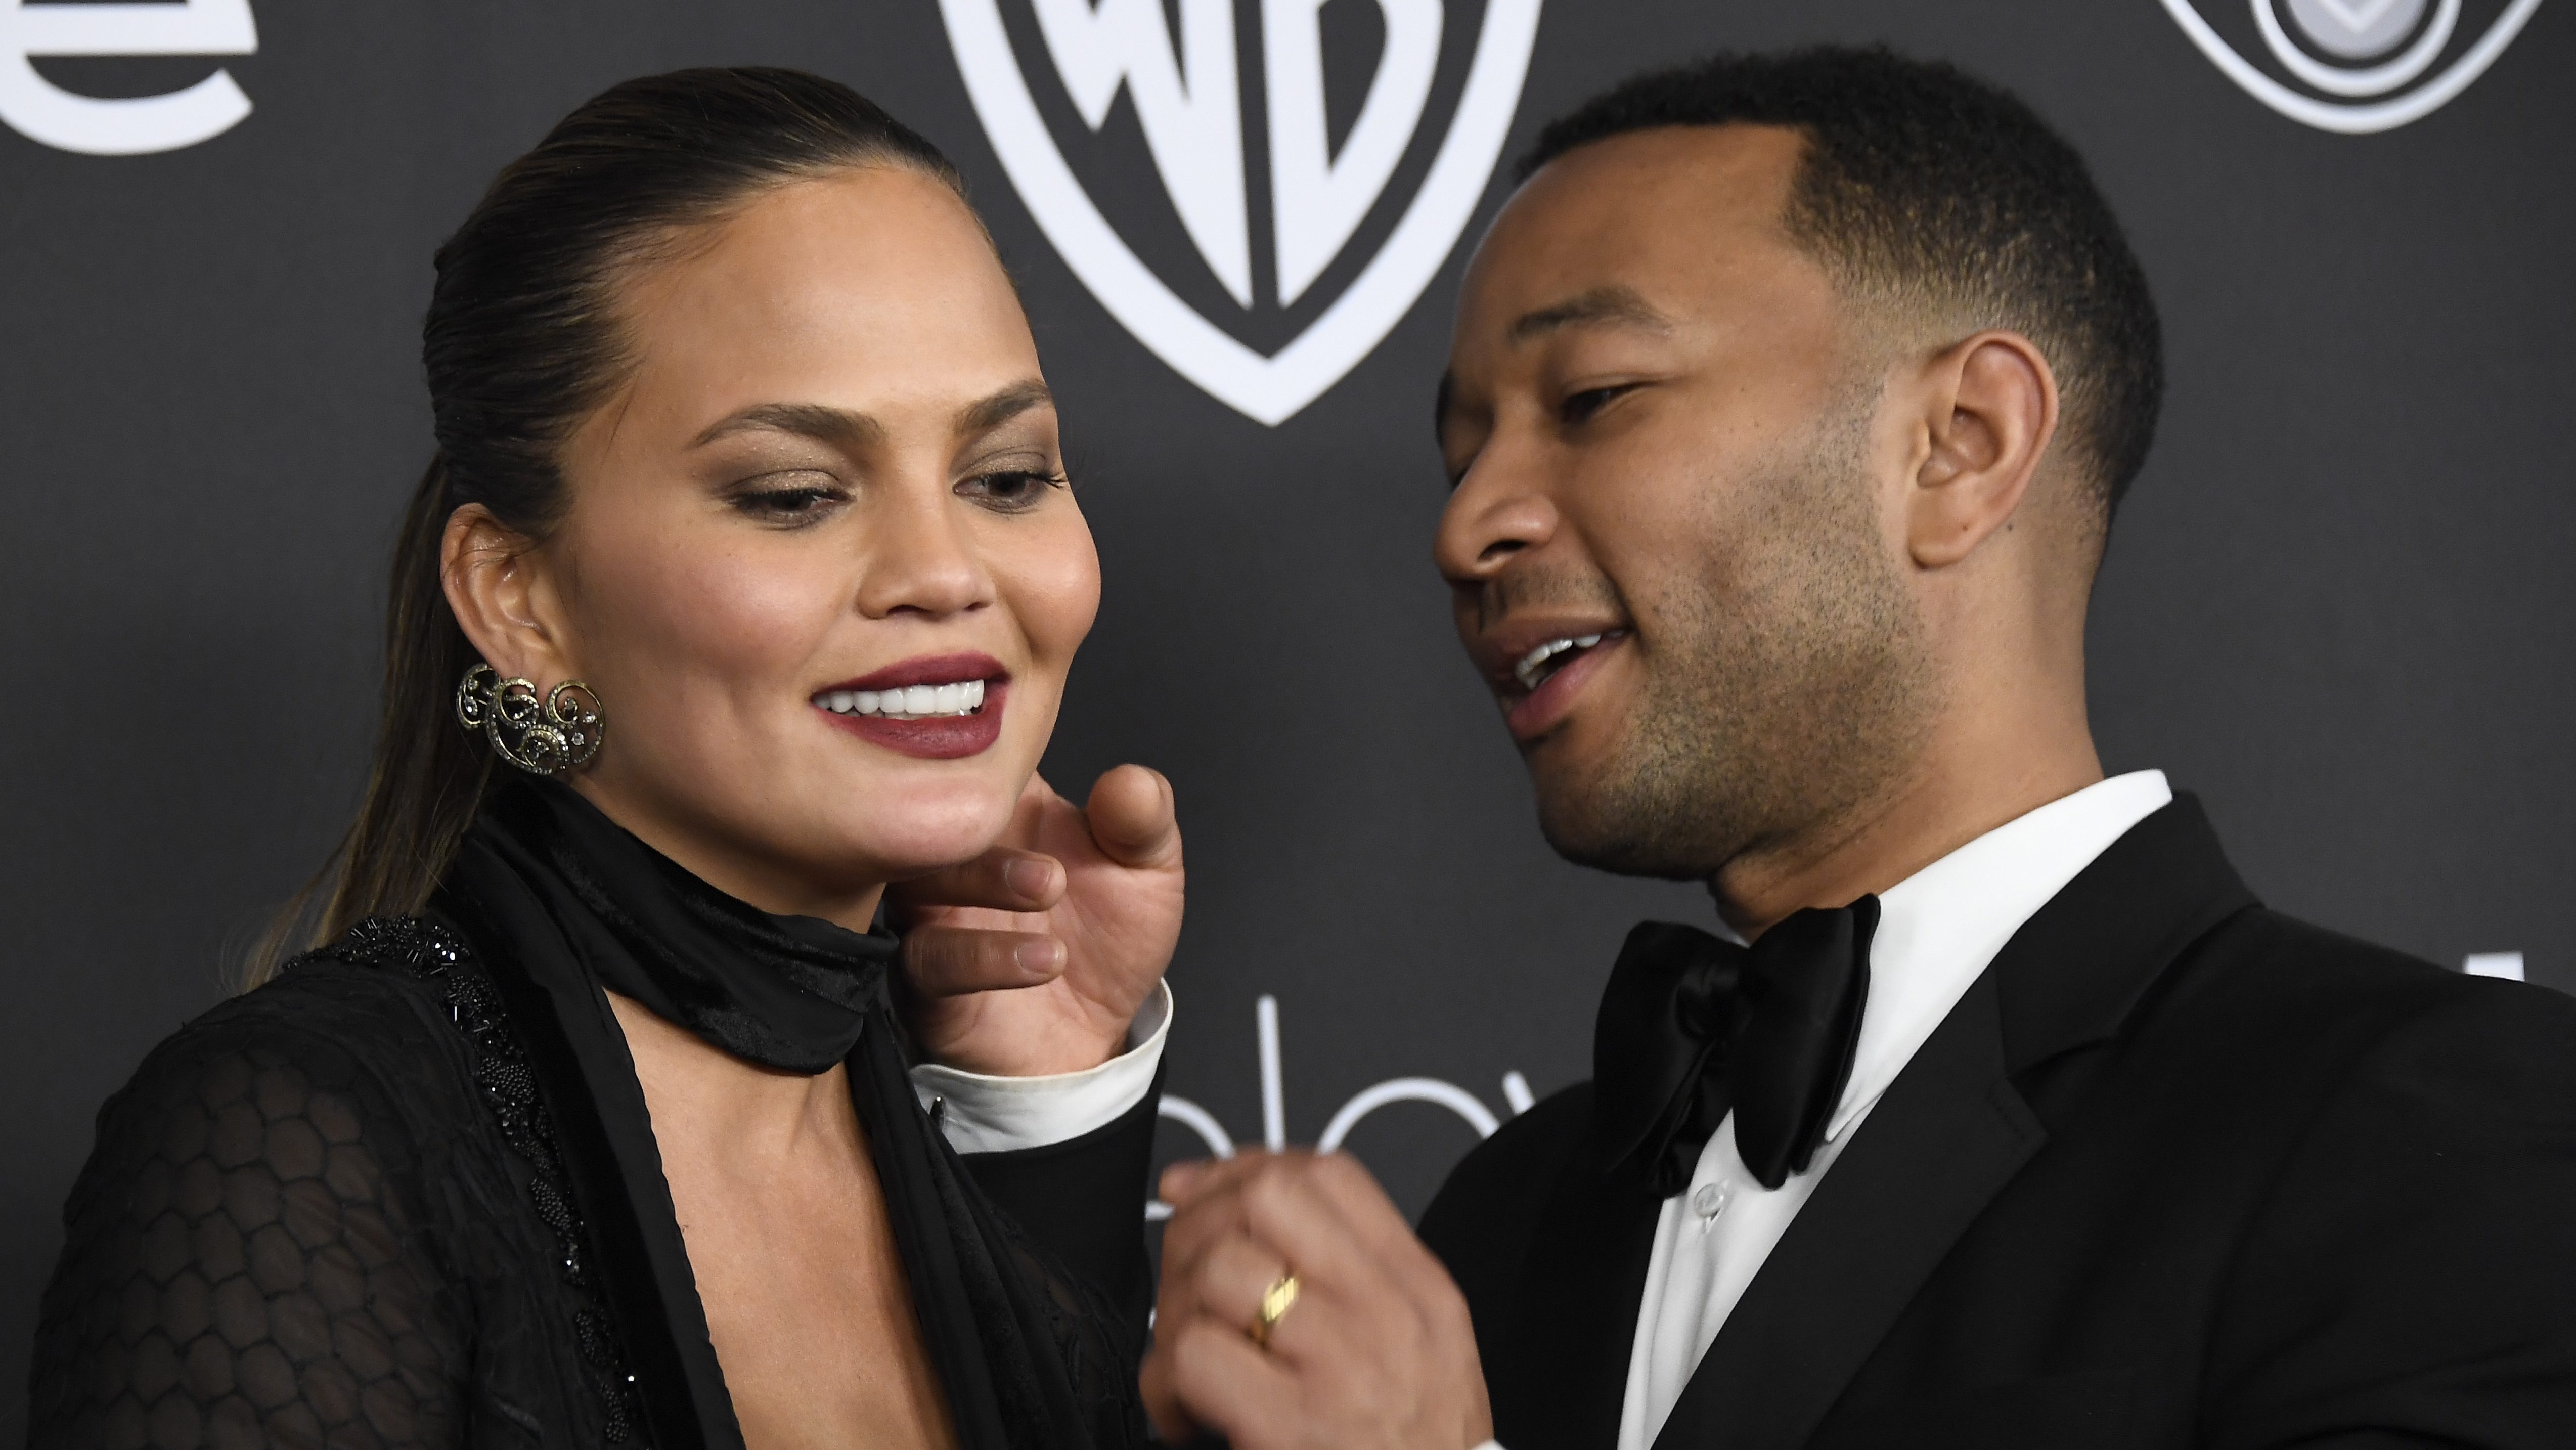 John Legends Wife Chrissy Teigen 5 Fast Facts You Need To Know